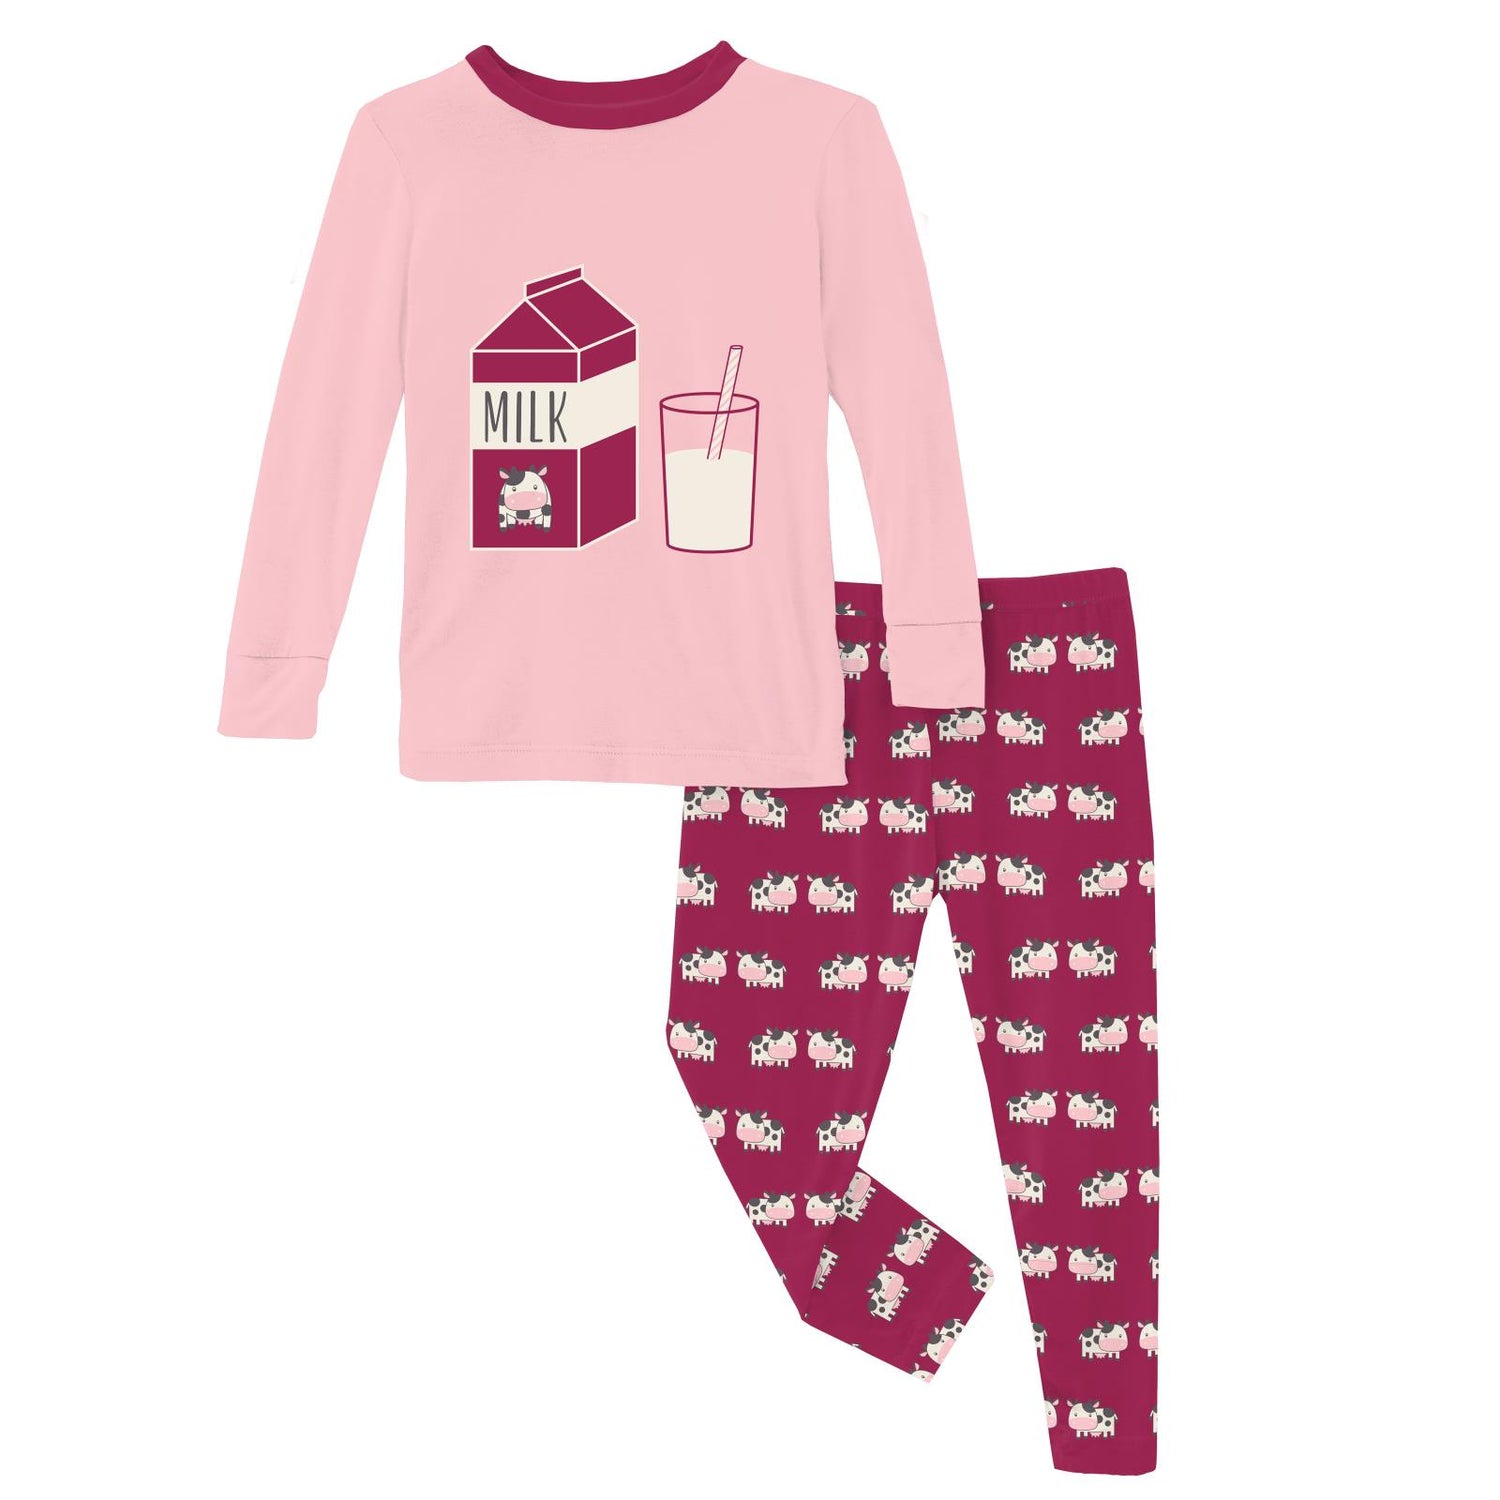 Long Sleeve Graphic Tee Pajama Set in Berry Cow